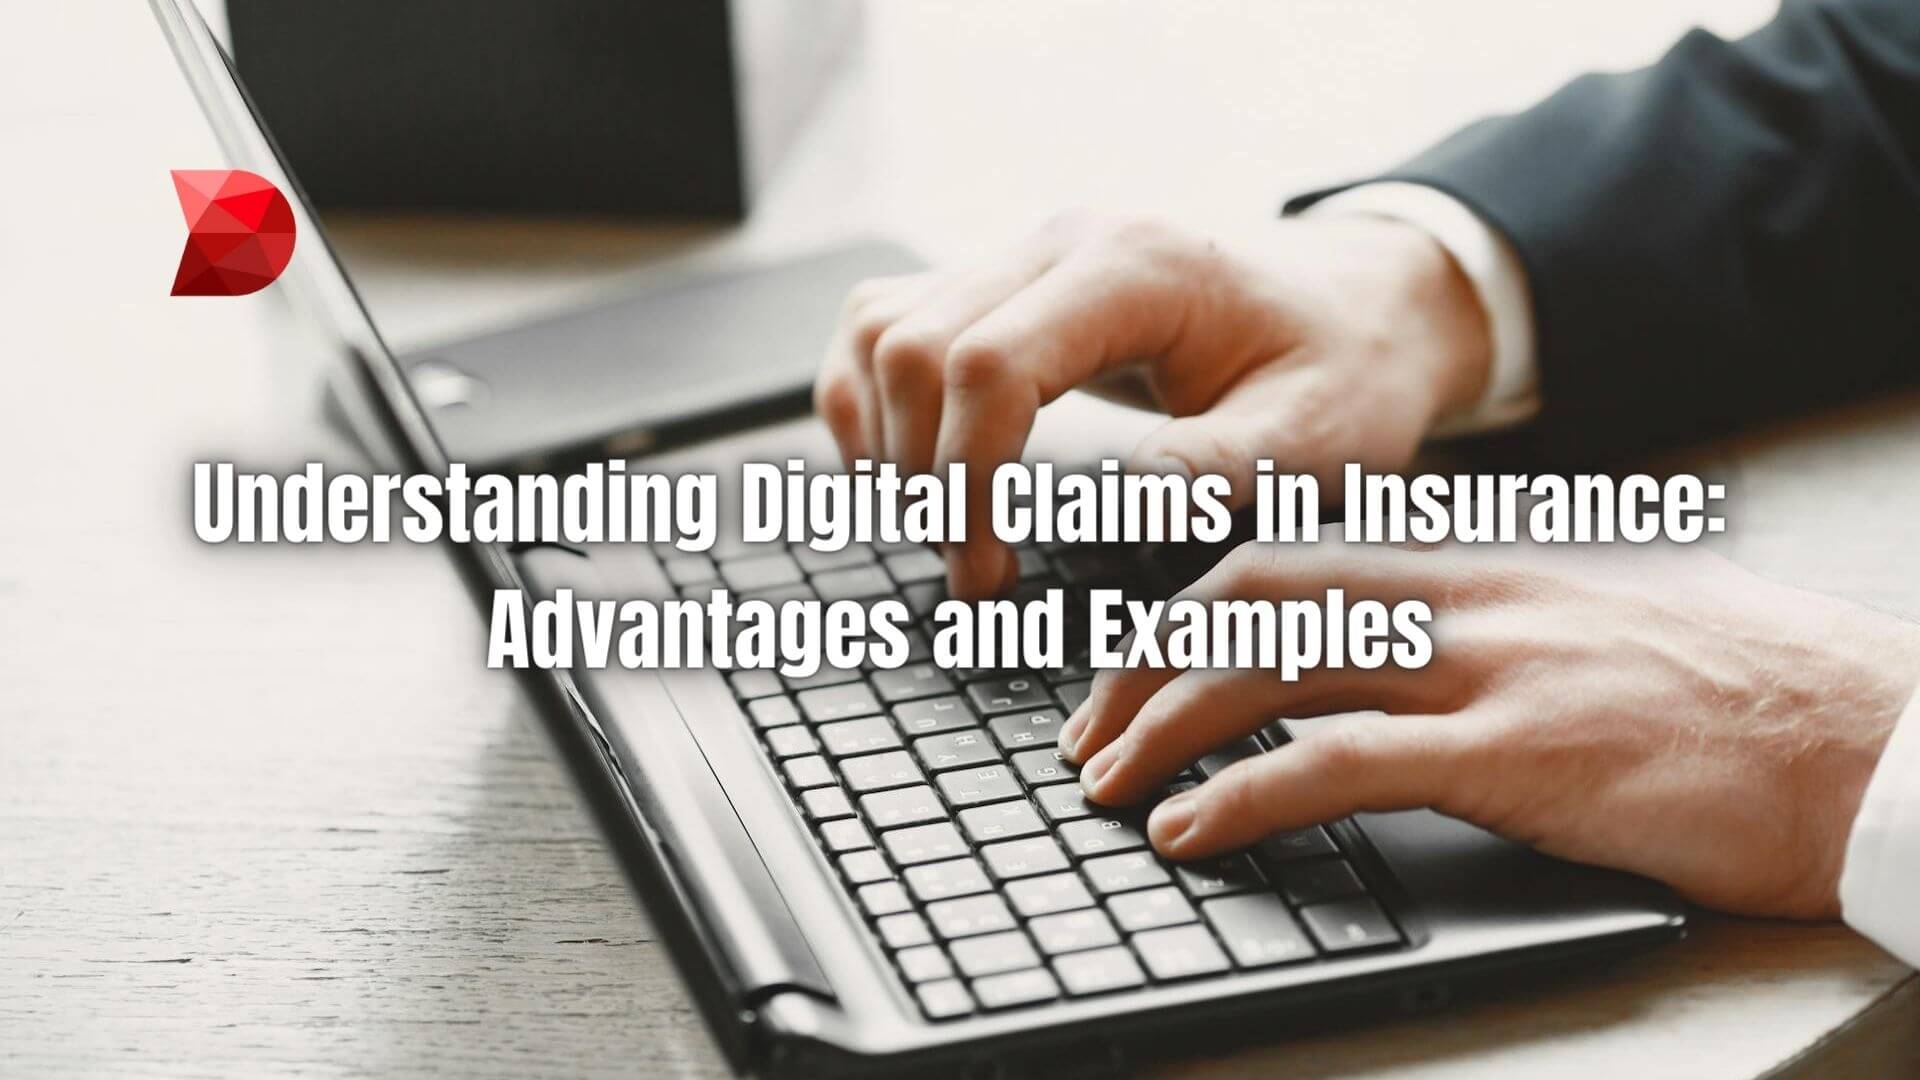 Unlock the benefits of digital claims in insurance with our comprehensive guide. Learn the advantages and explore real-world examples.